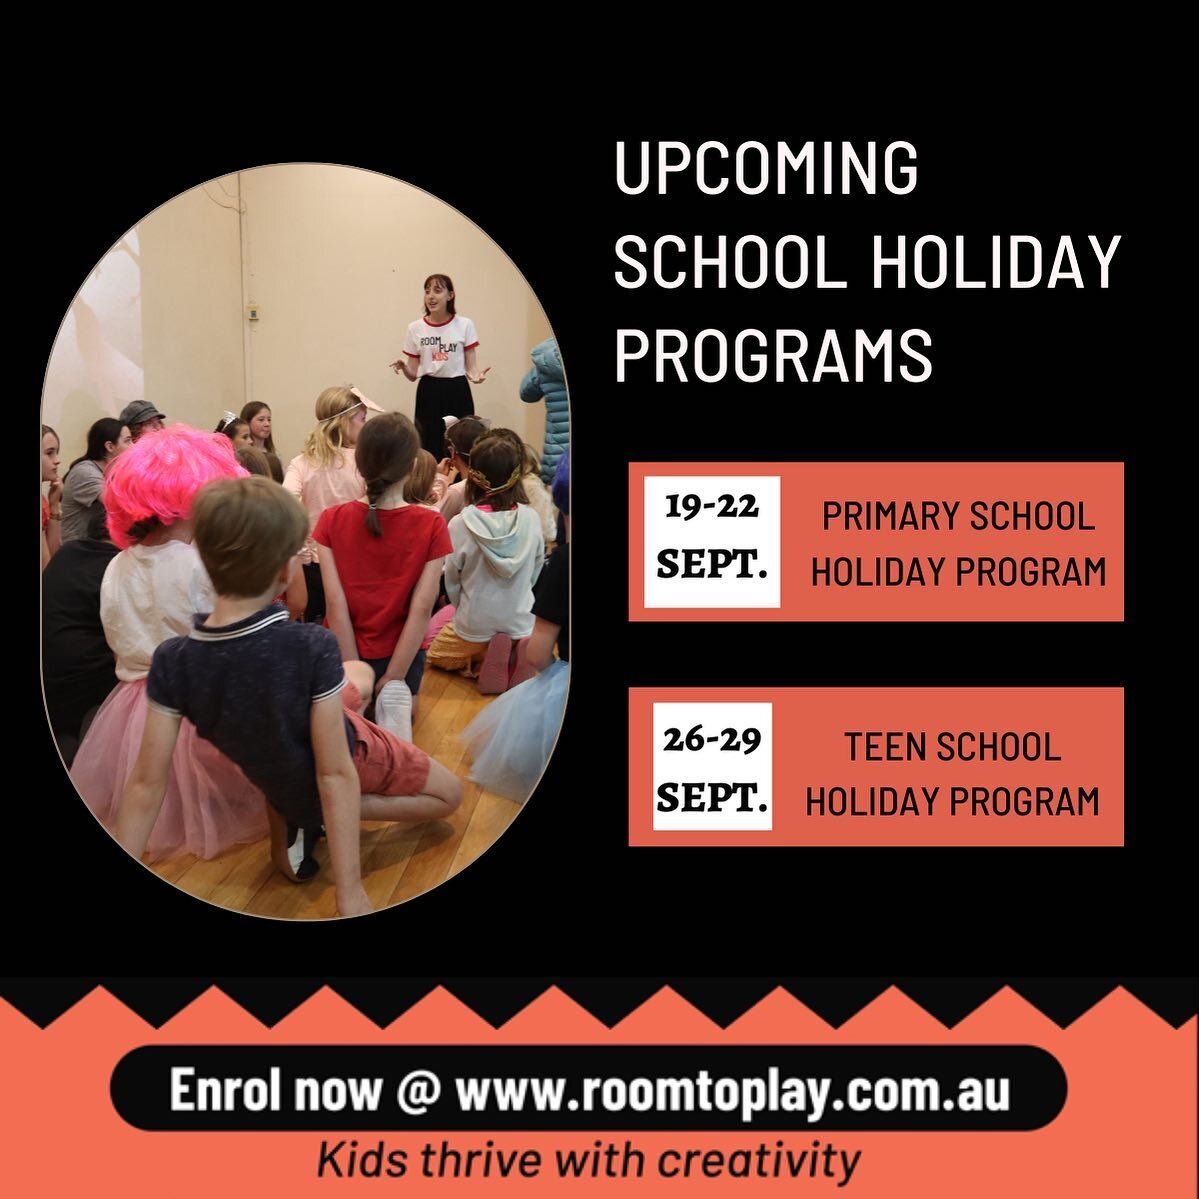 Our school holiday programs start in one weeks time and we only have FOUR spots left for our primary school holiday program! 

At Room to Play Kids, we&rsquo;re offering two programs: one for primary aged students and one for teens.

🎭 Primary Schoo